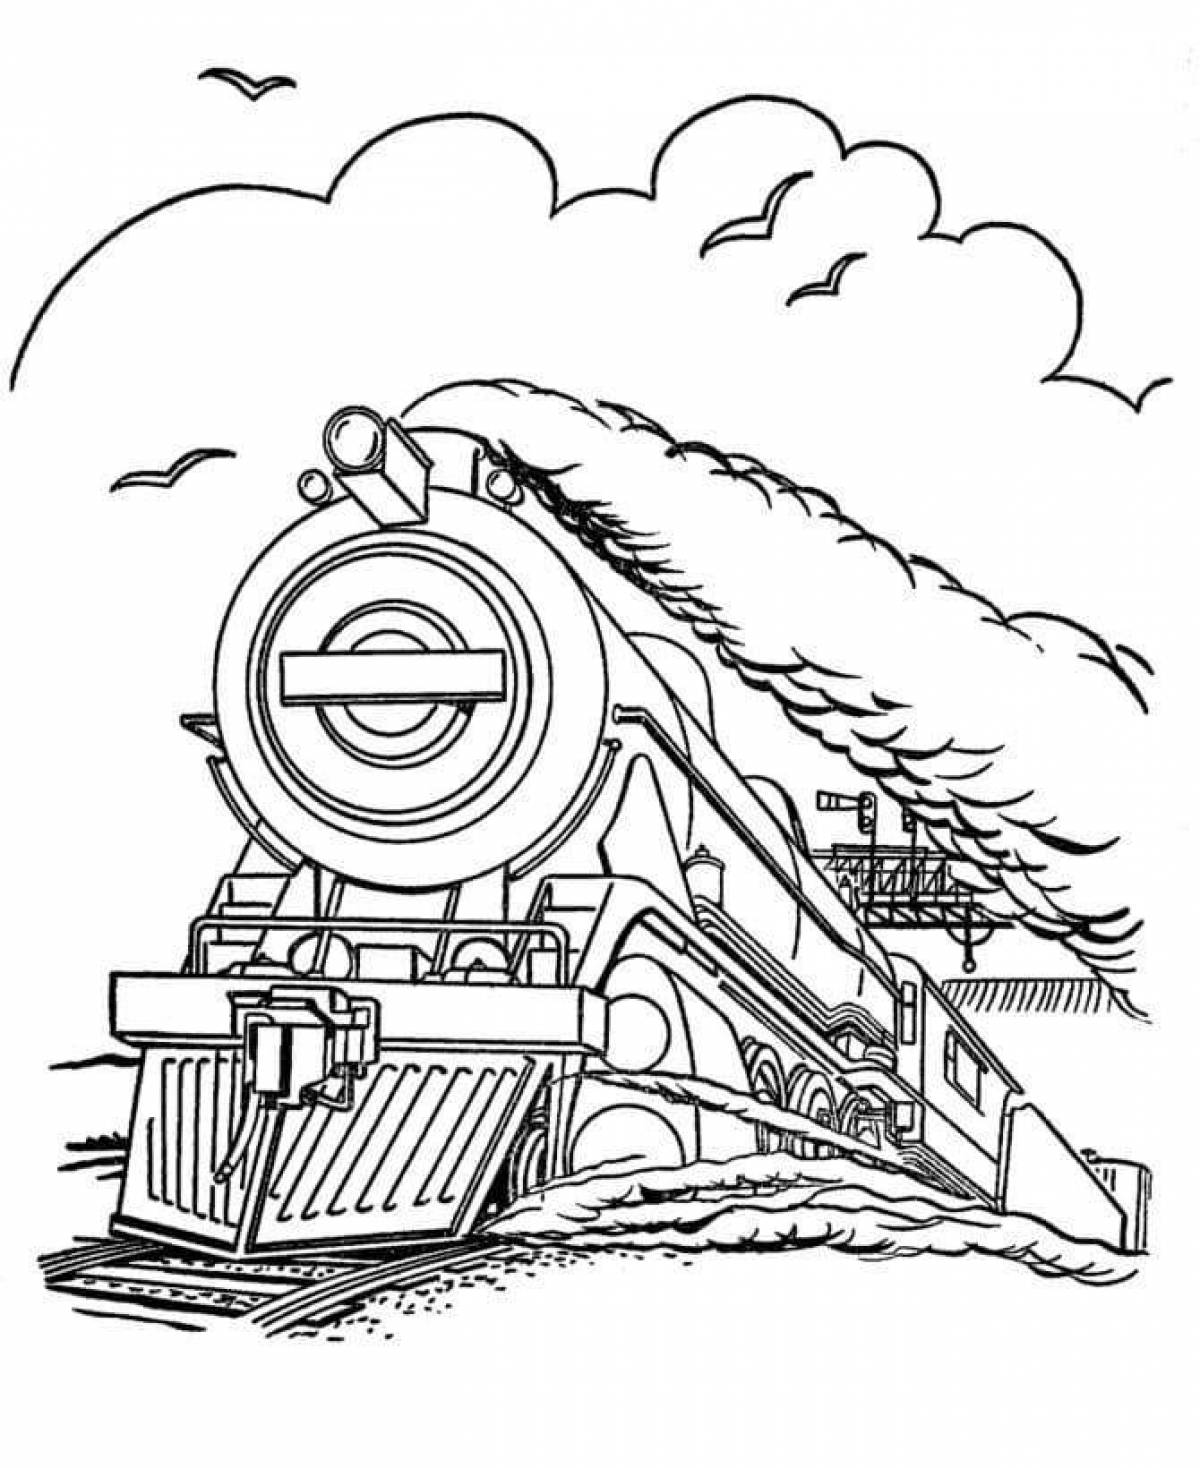 Coloring page funny train eater